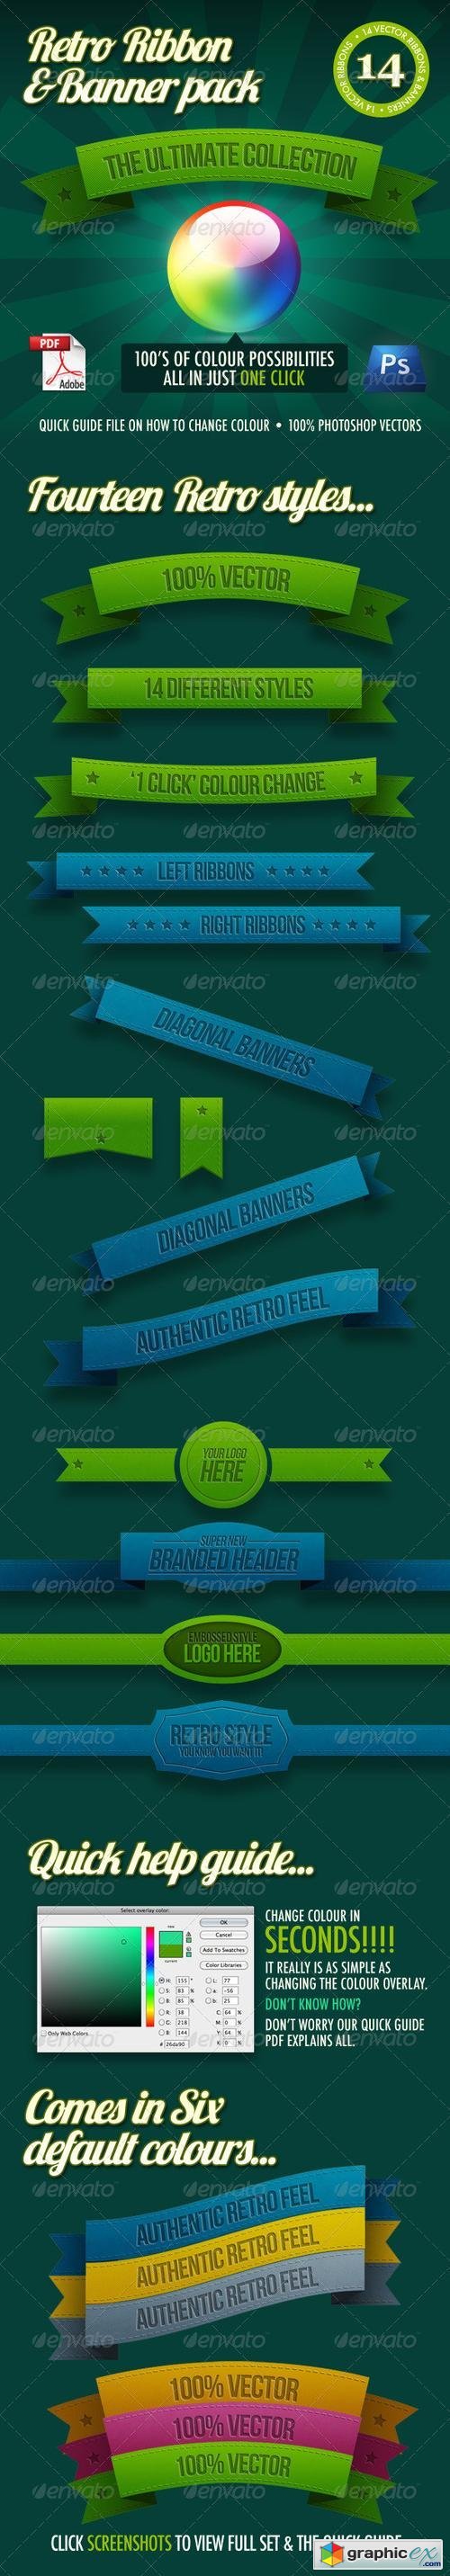 14 Retro Ribbons & Banners